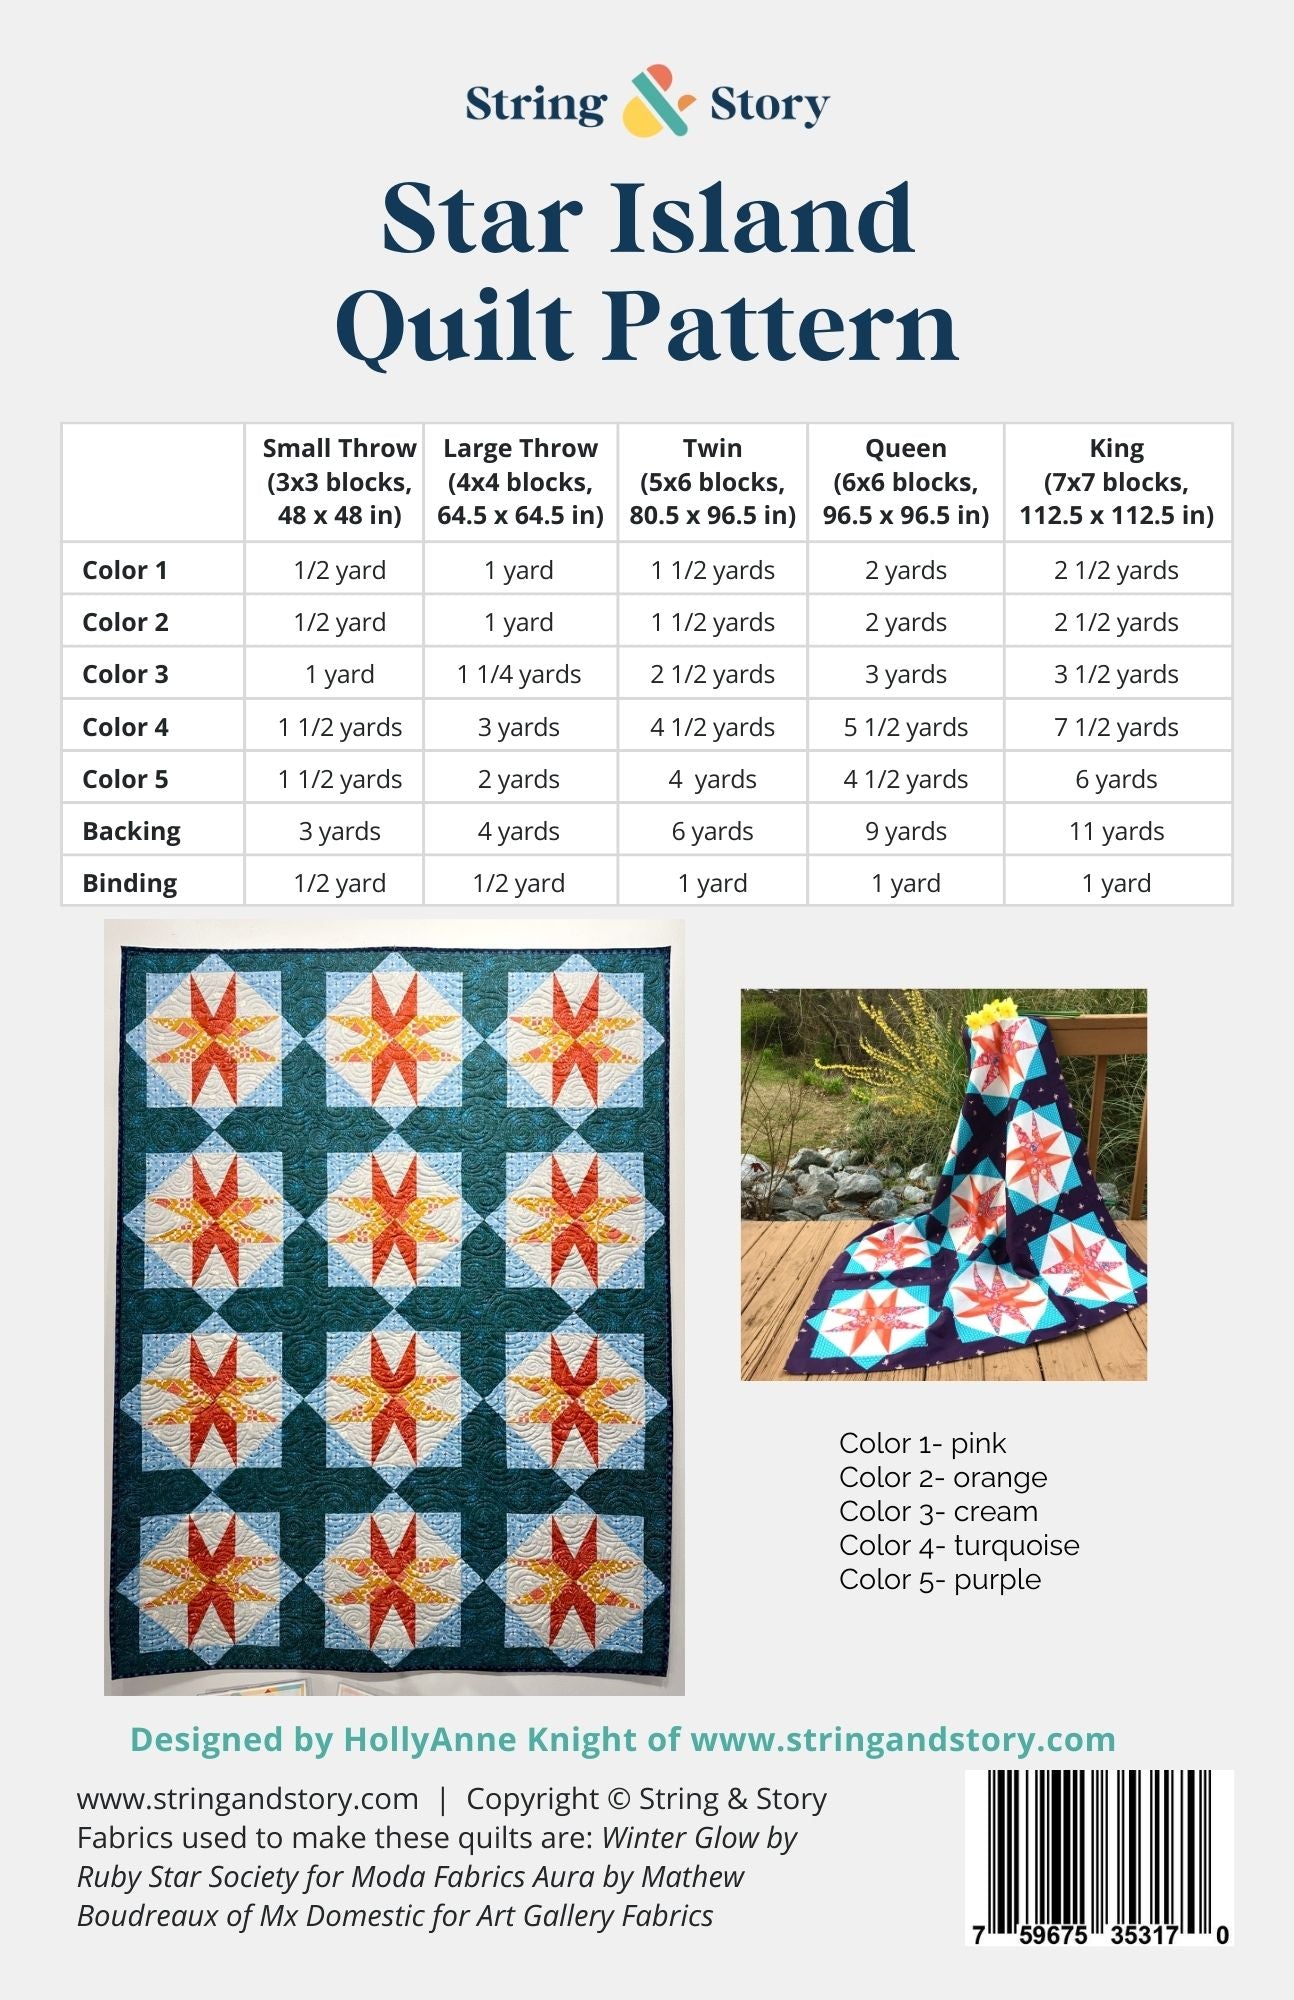 Patterns: Star Island Quilt - PAPER PATTERN by HollyAnne Knight for String & Story